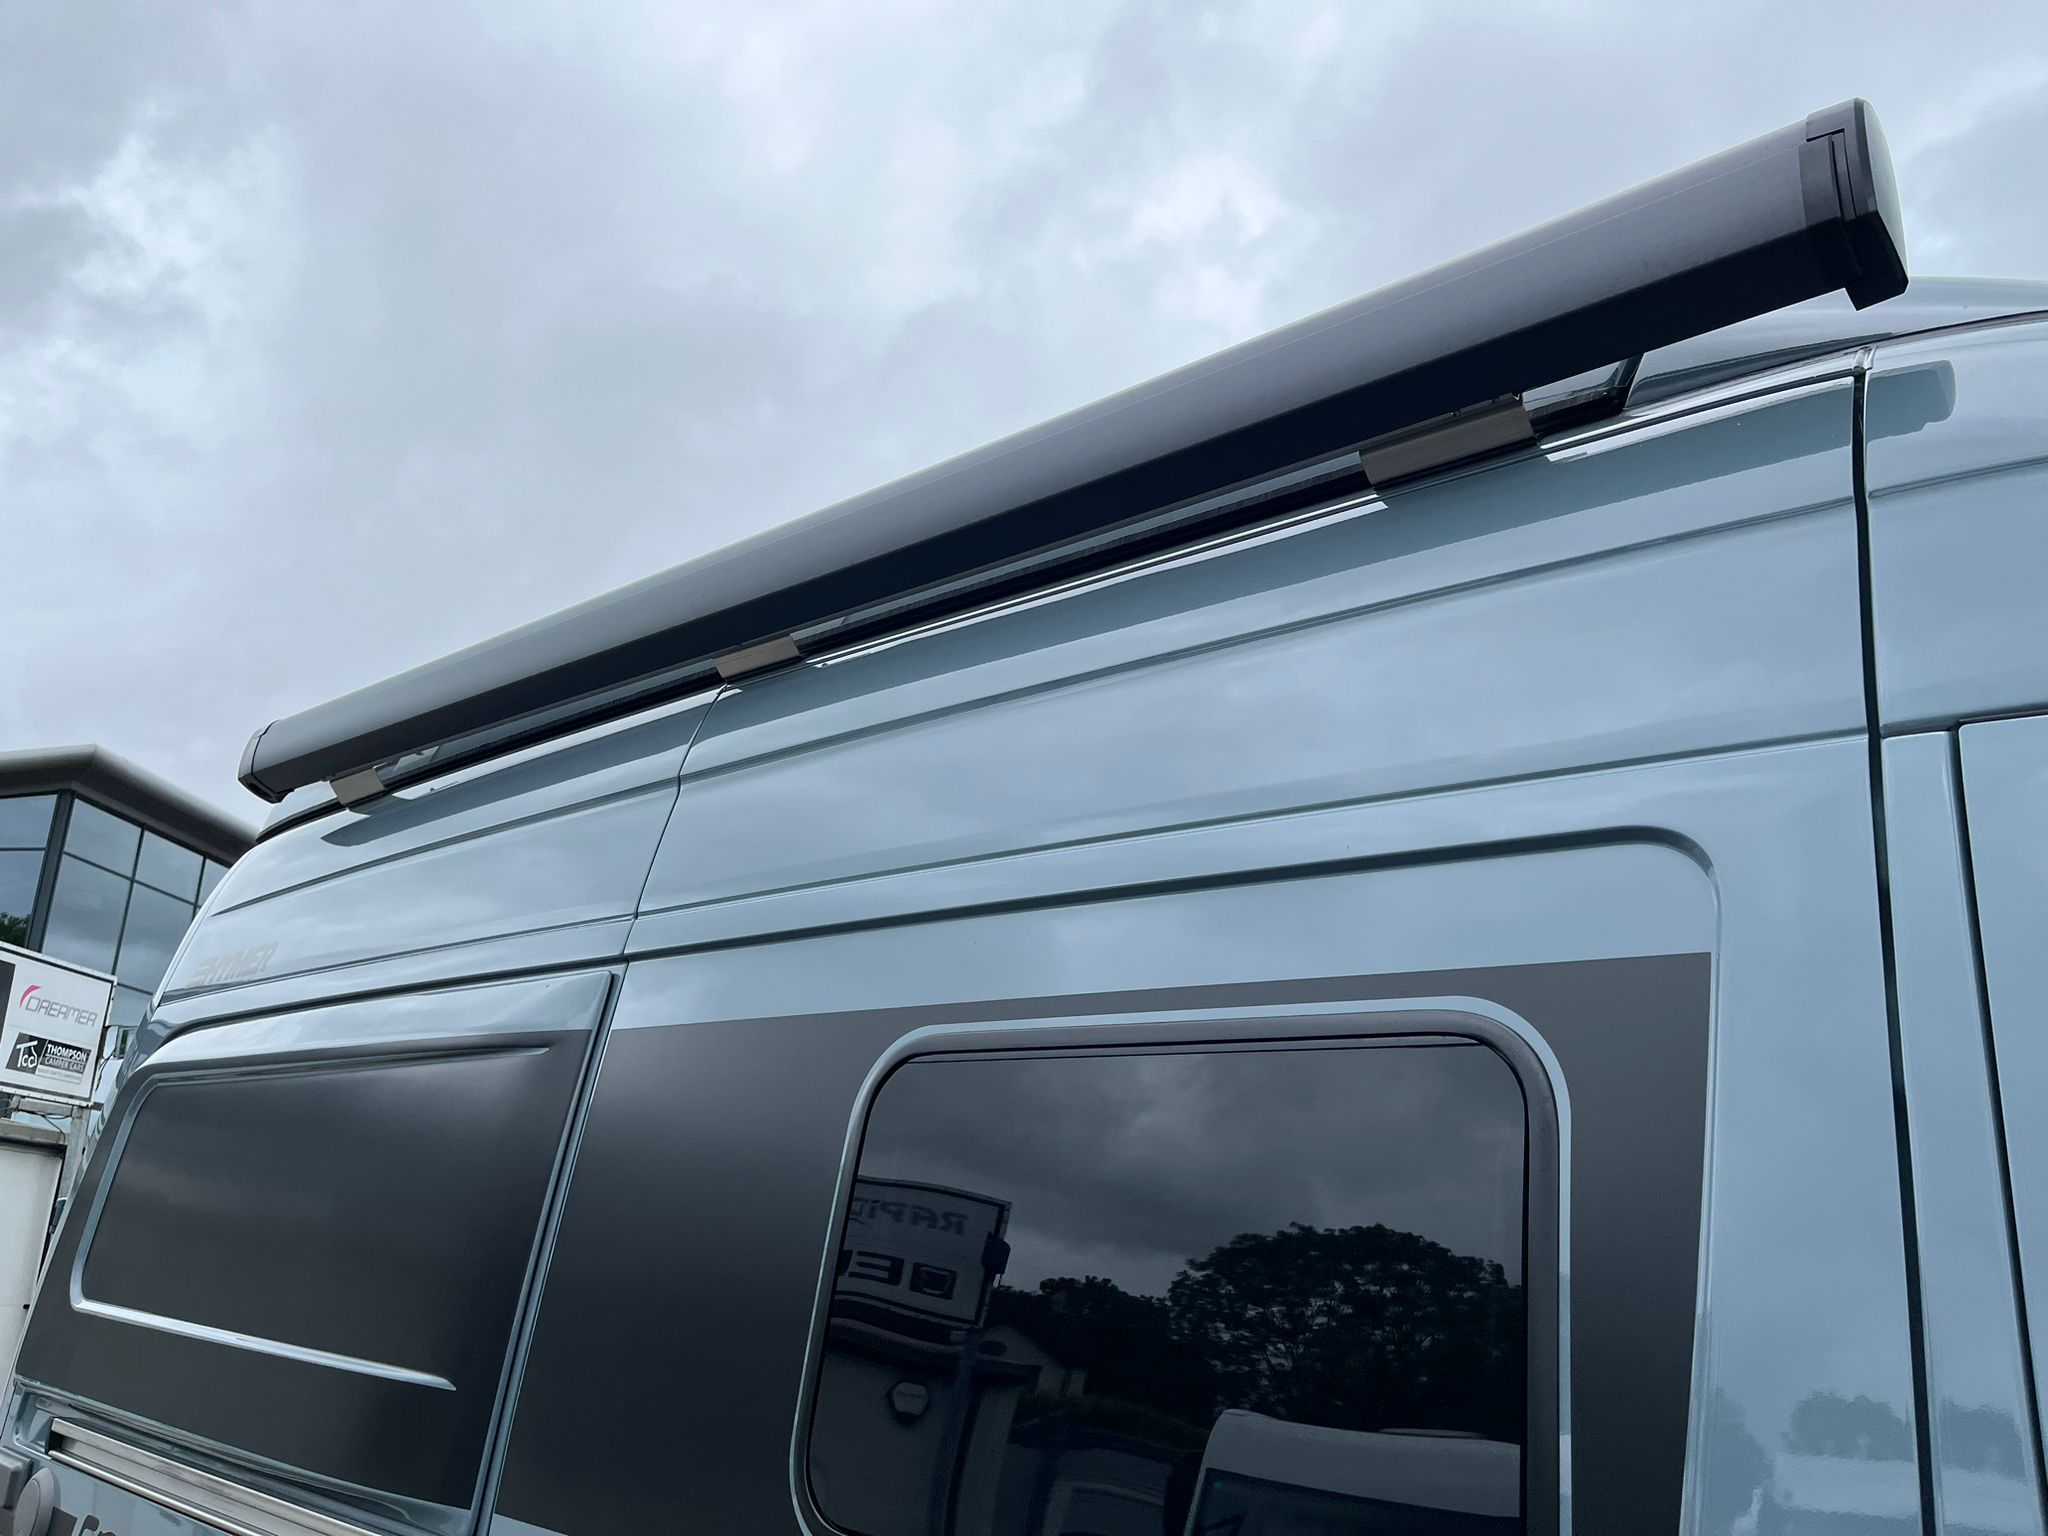 New Hymer Free S 600 - Automatic